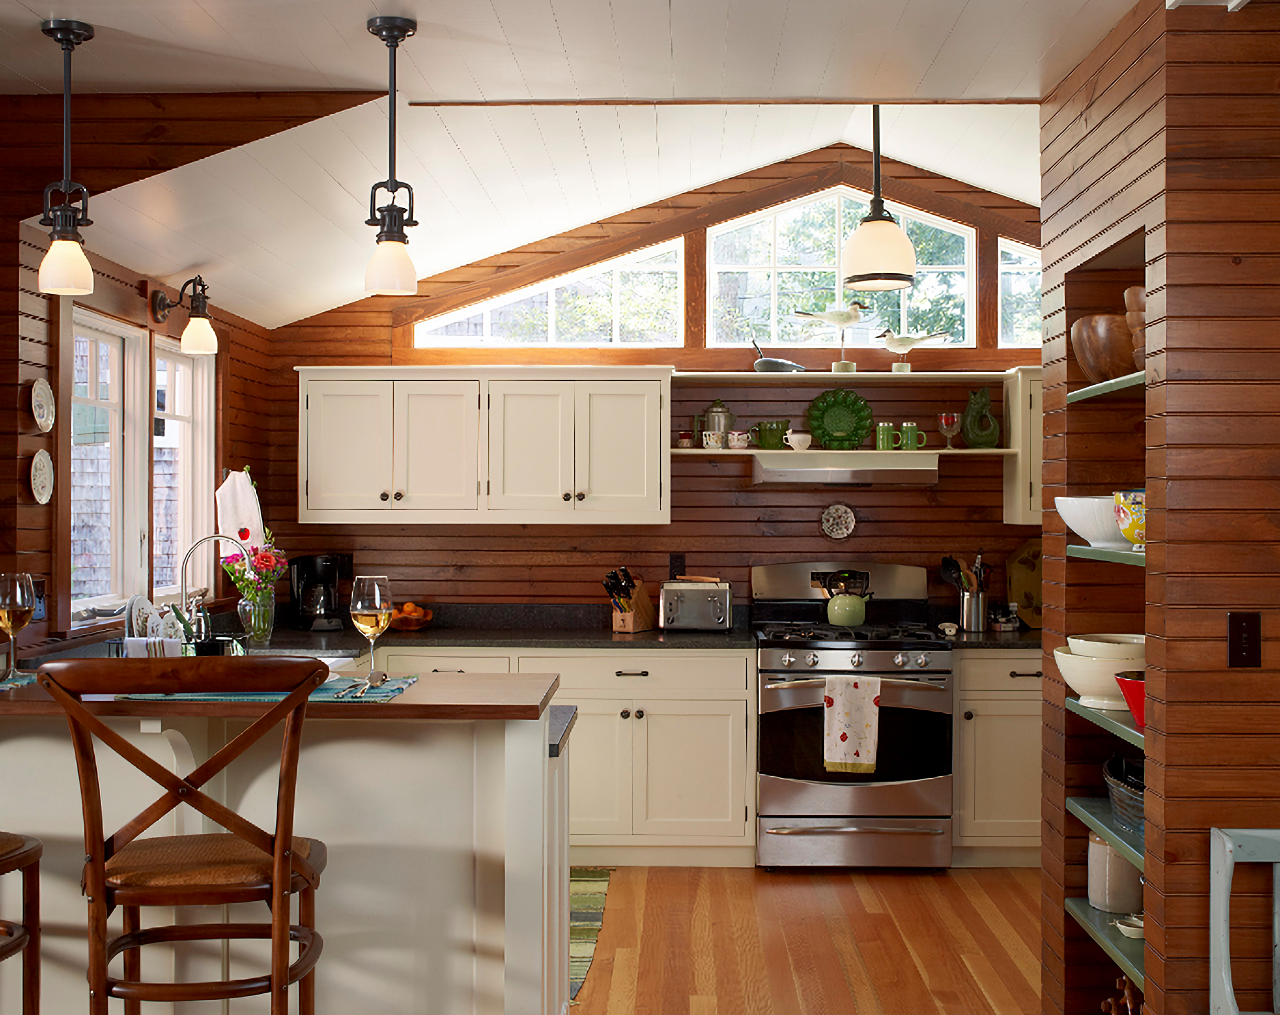 Cabin style kitchen in a Portland, Maine home